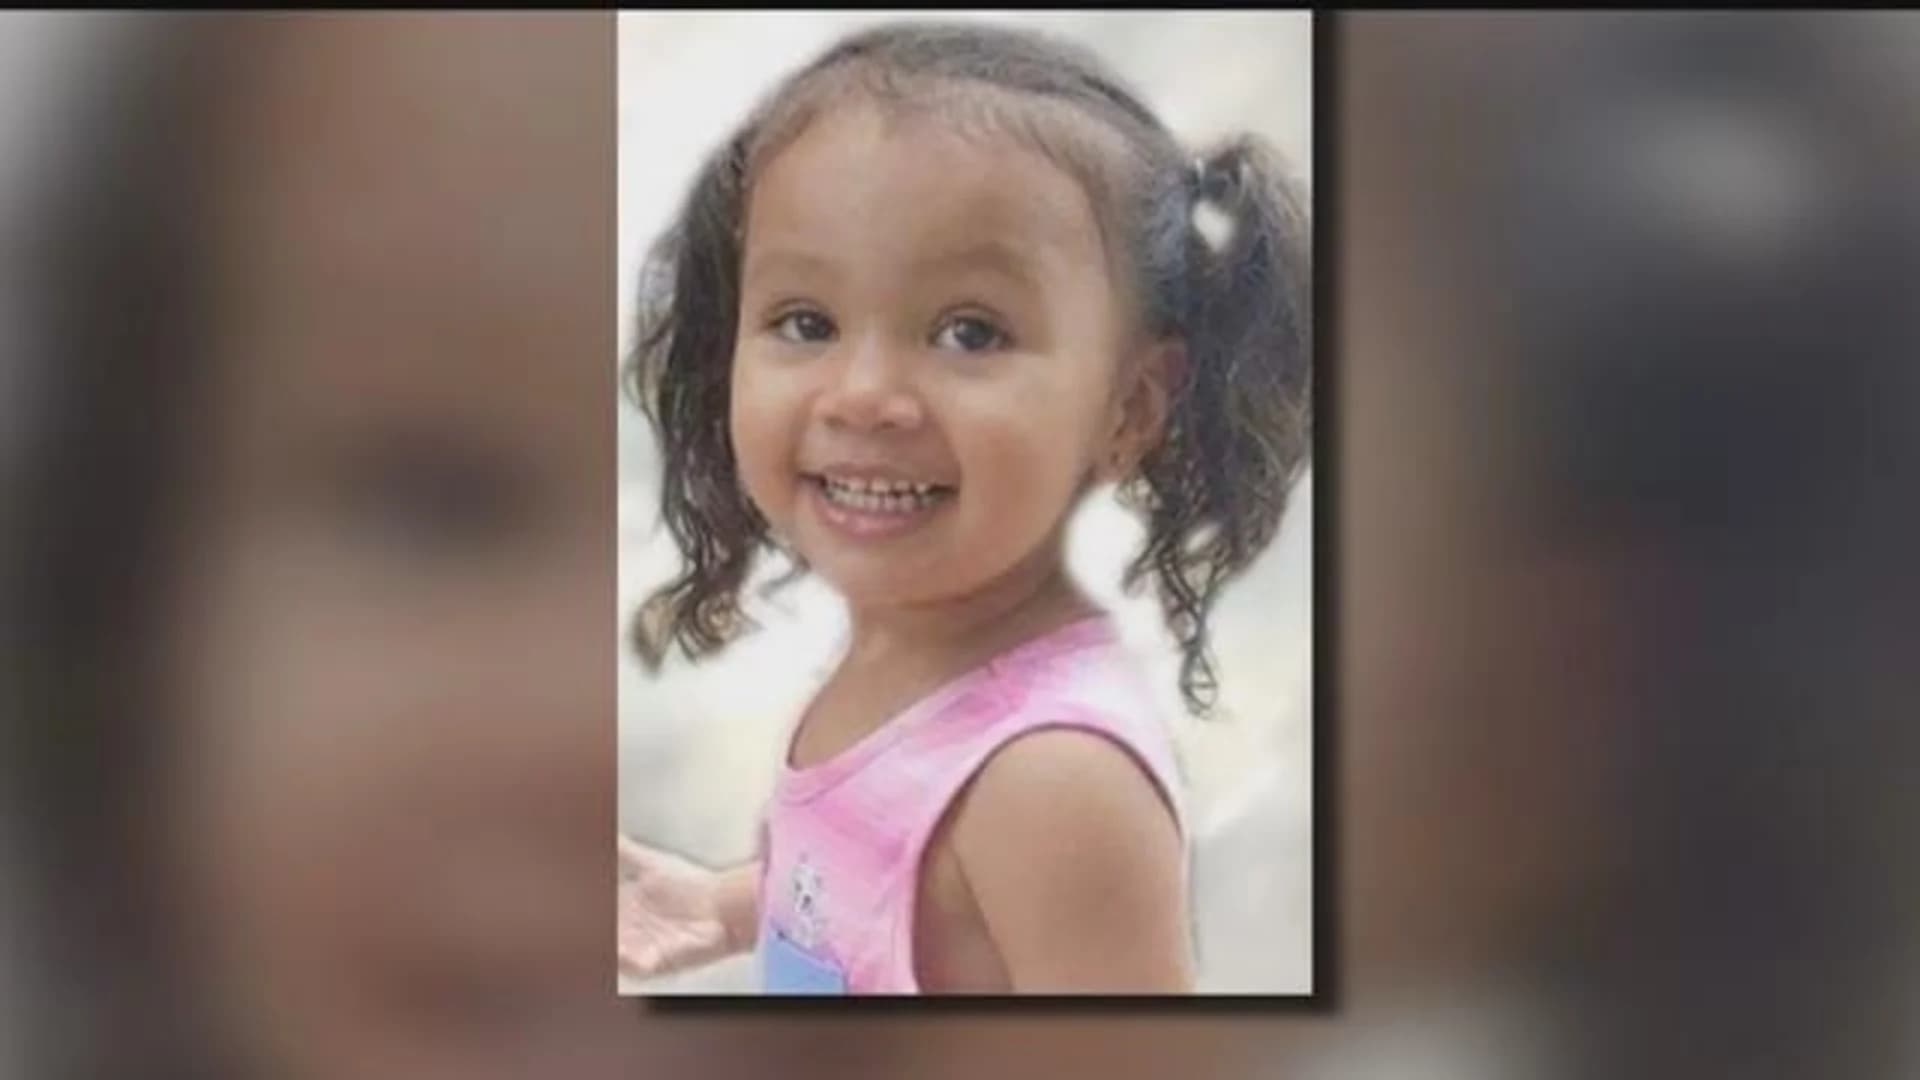 Water safety warning marks 1 year since Bridgeport toddler’s death